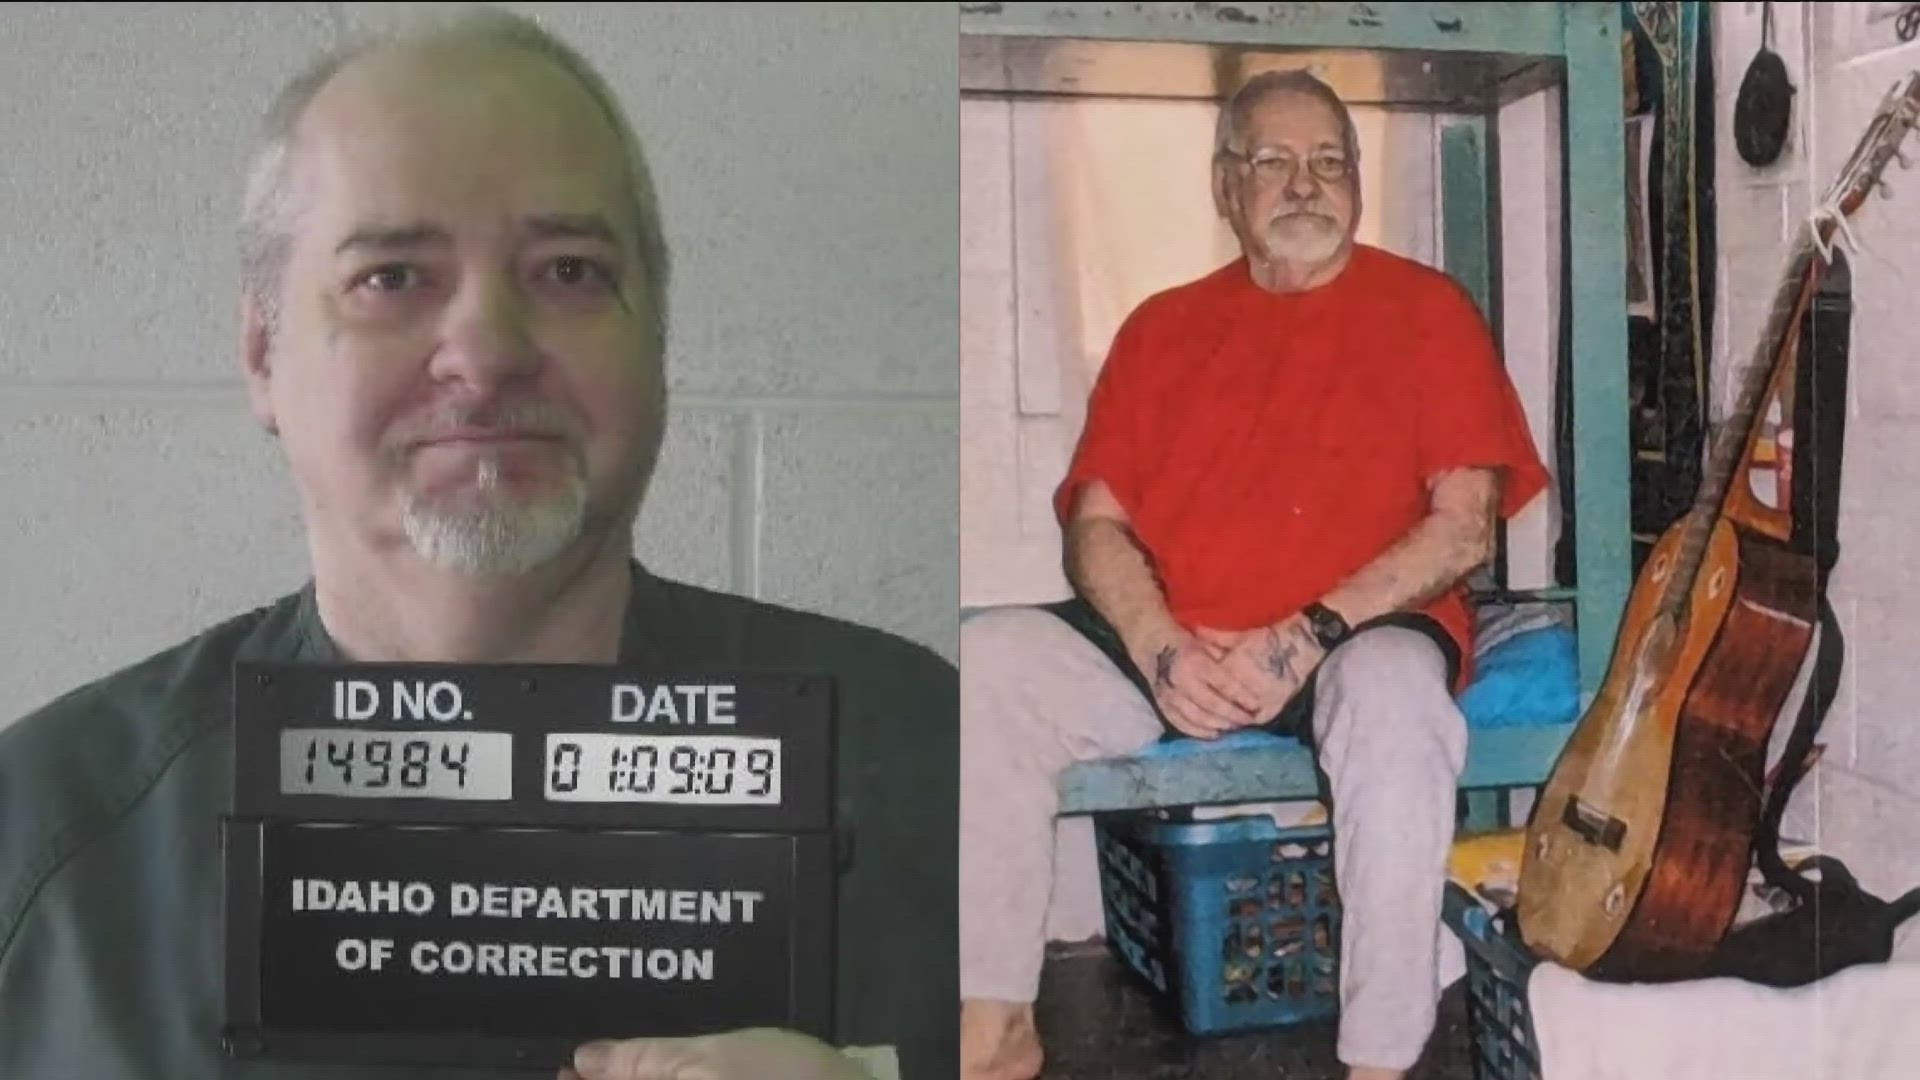 7 Investigates obtained records for the Idaho Department of Correction stating Creech was taken to the hospital at least twice in recent years.